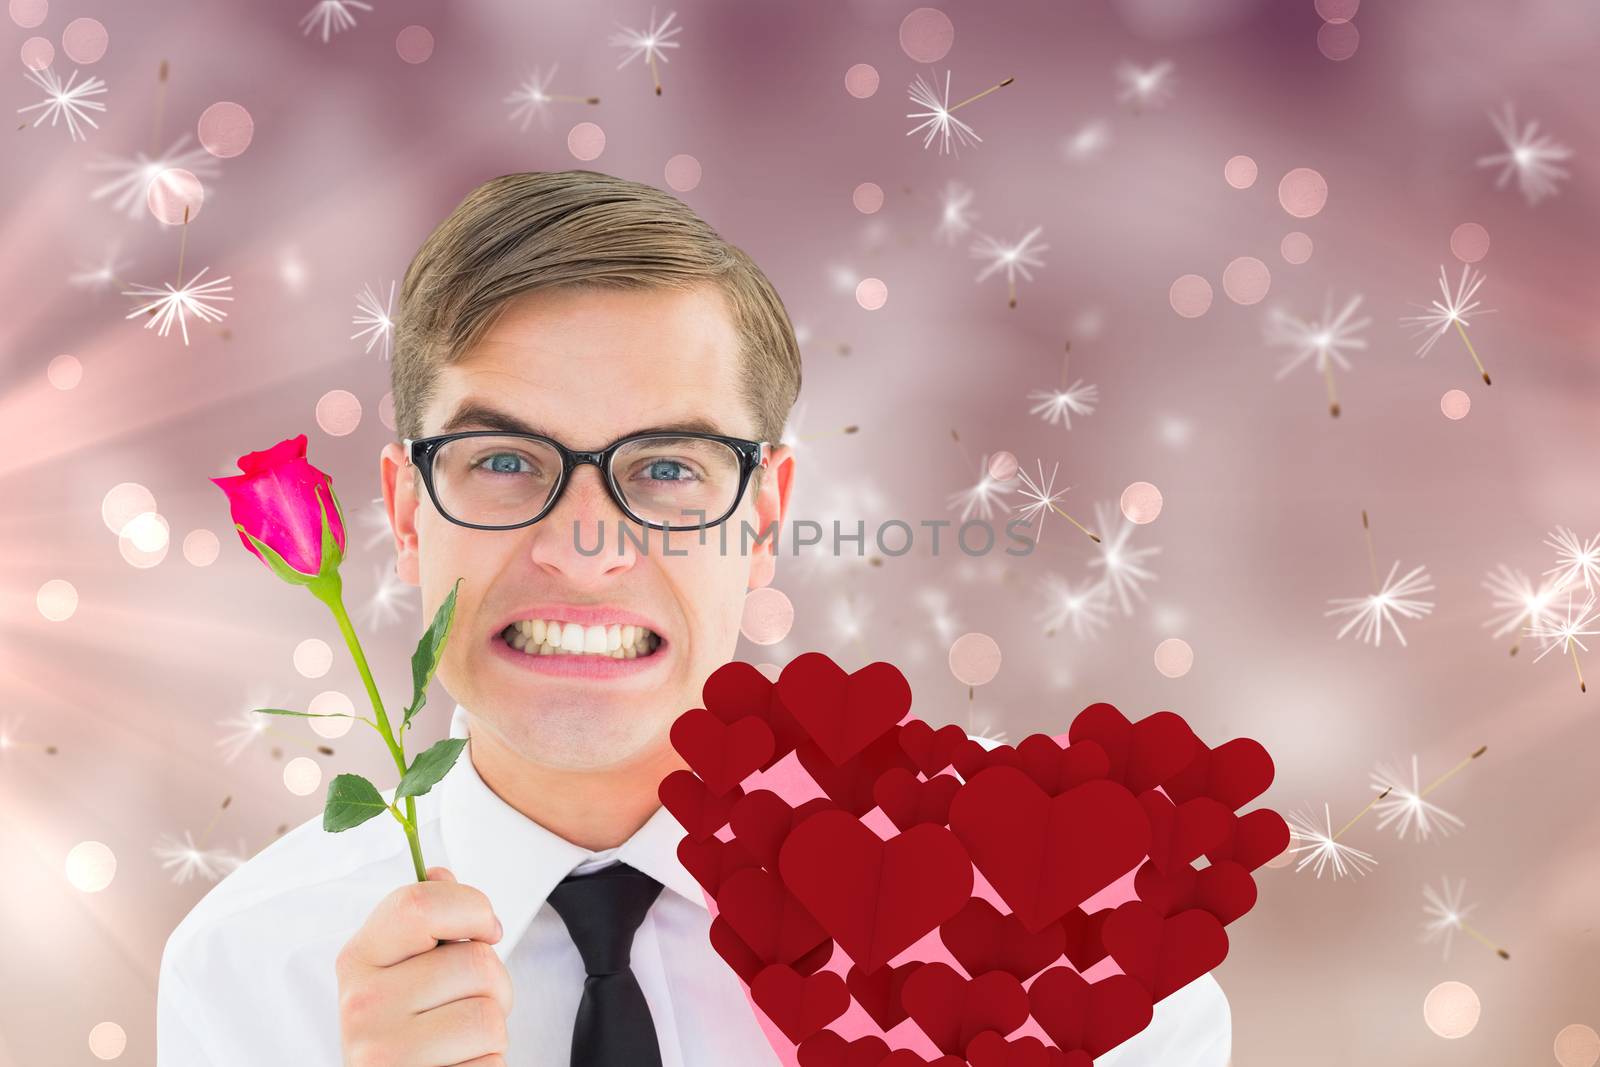 Romantic geeky hipster against digitally generated dandelion seeds on pink background